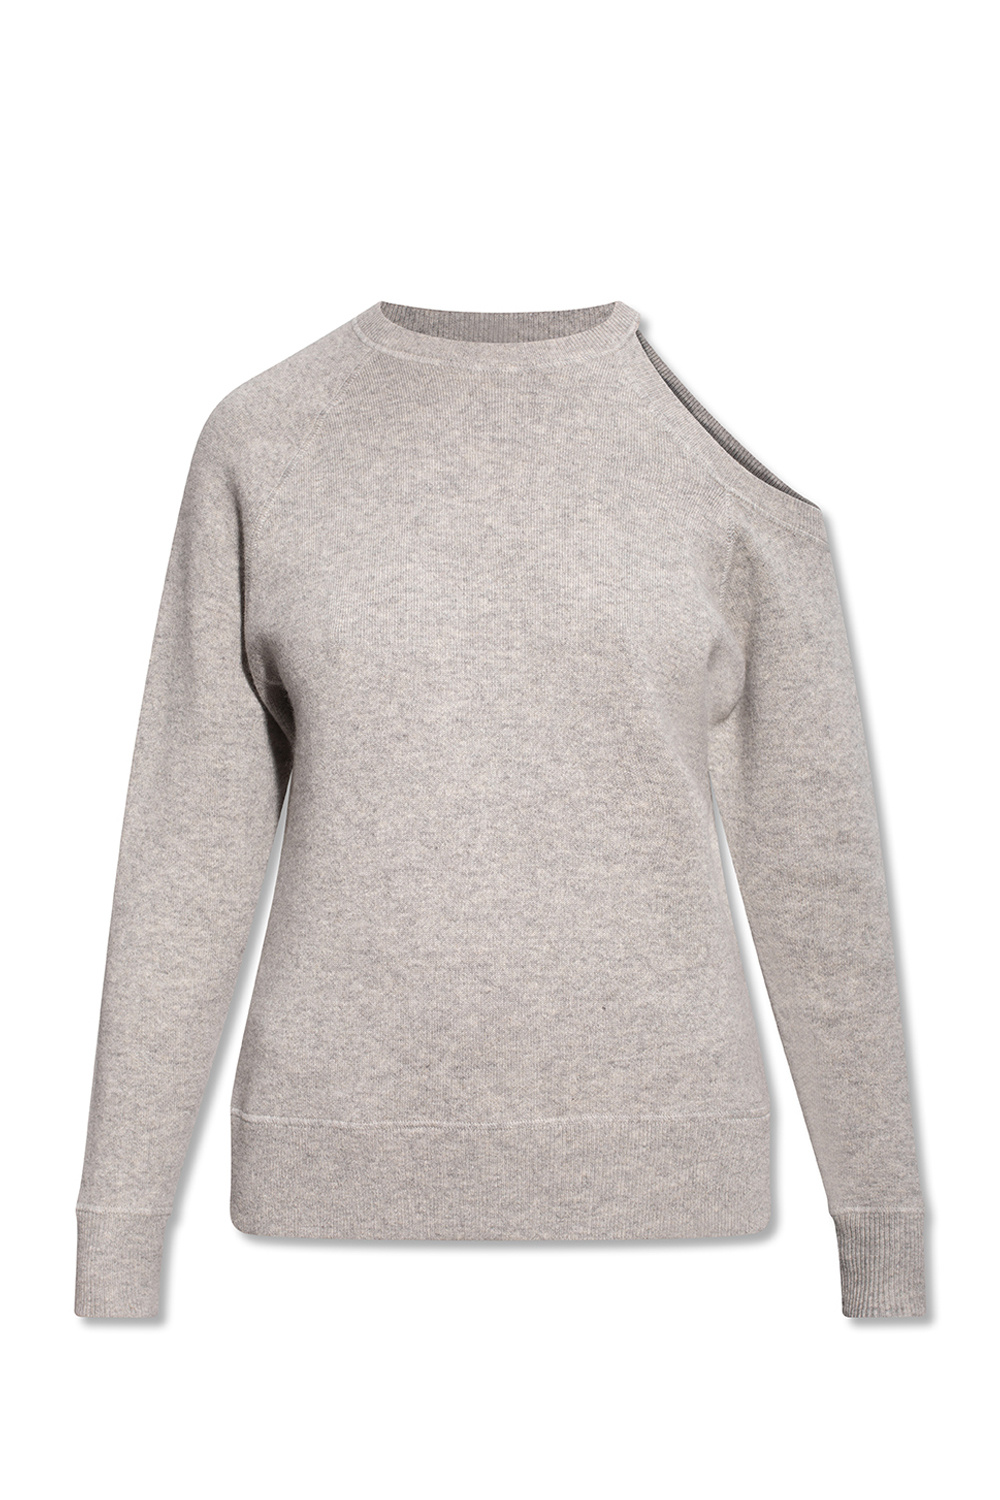 Michael Kors Sweater with denuded shoulder